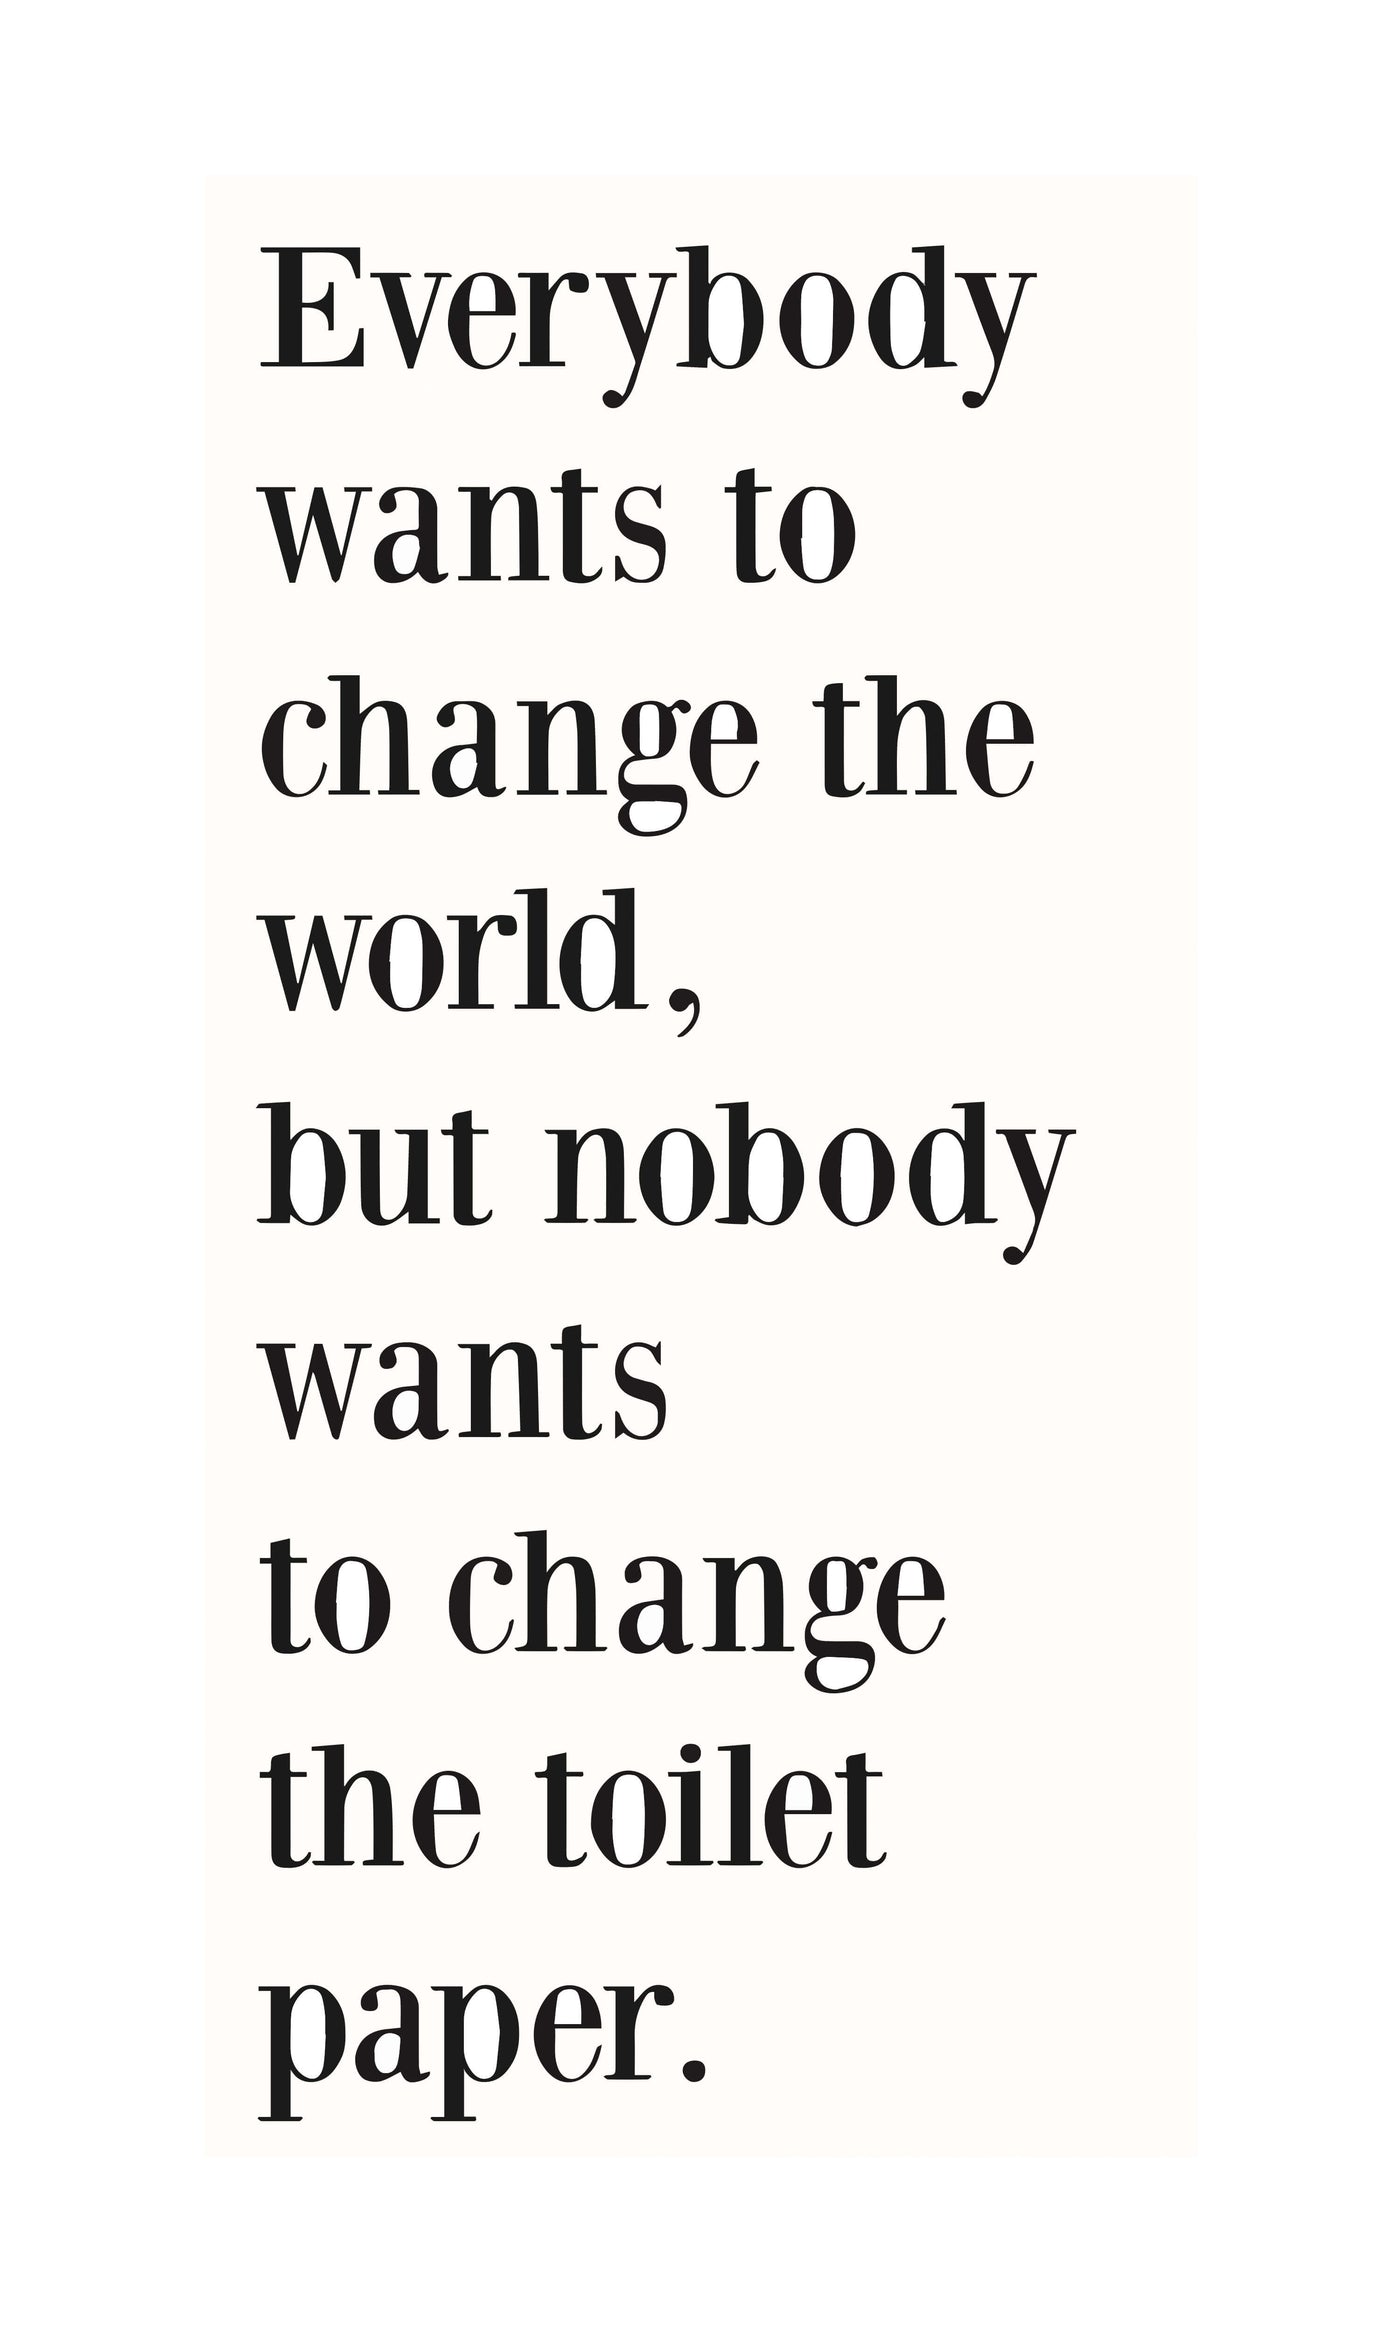 Everybody Wants to Change the World